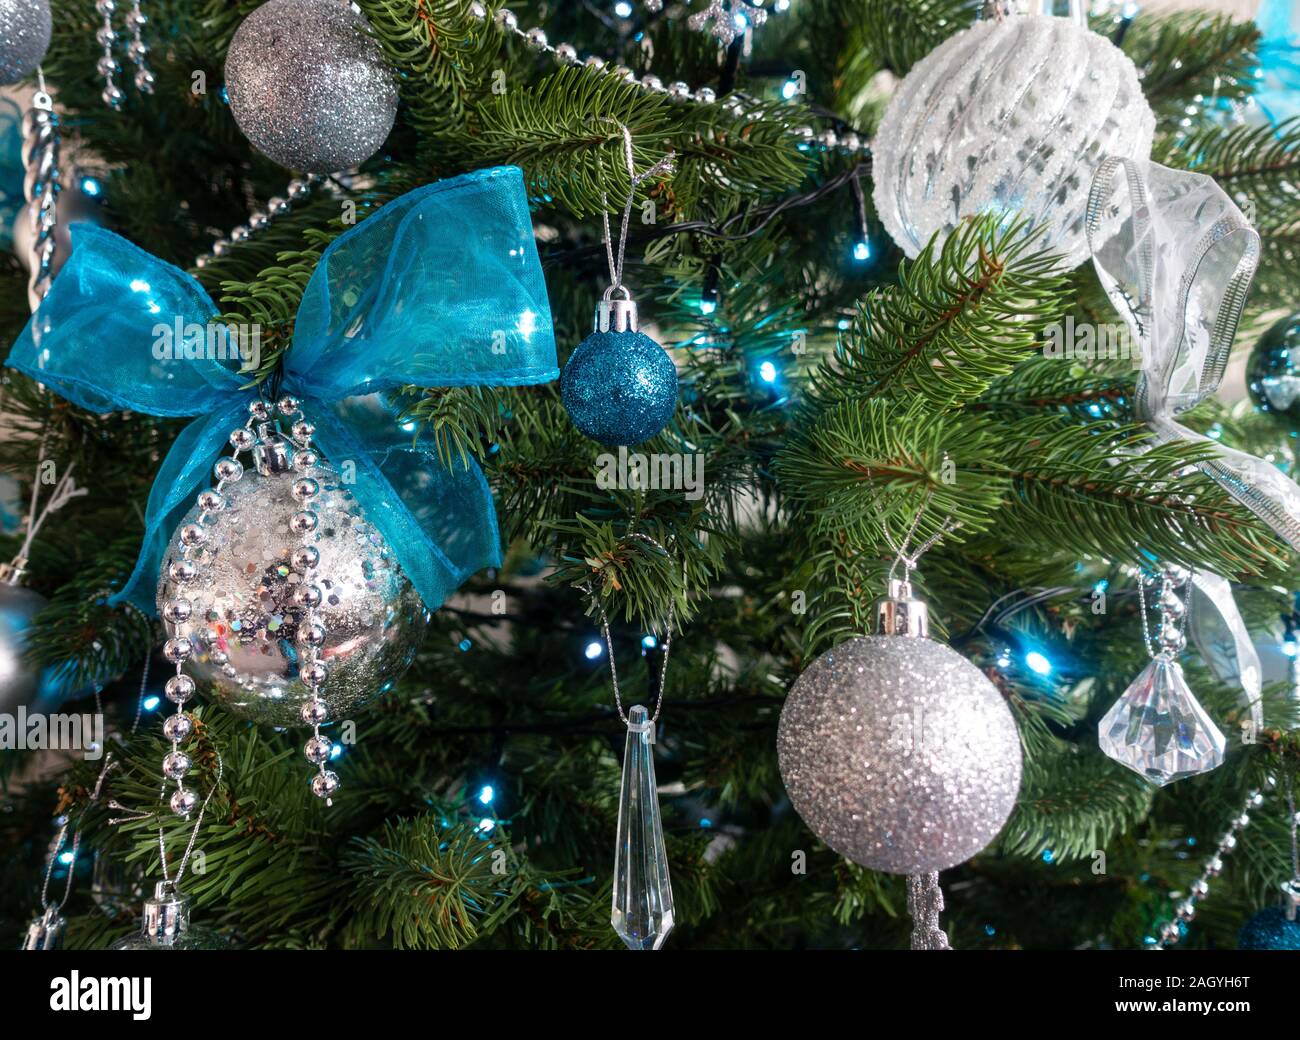 A Christmas tree decorated with silver and blue decorations. Stock Photo